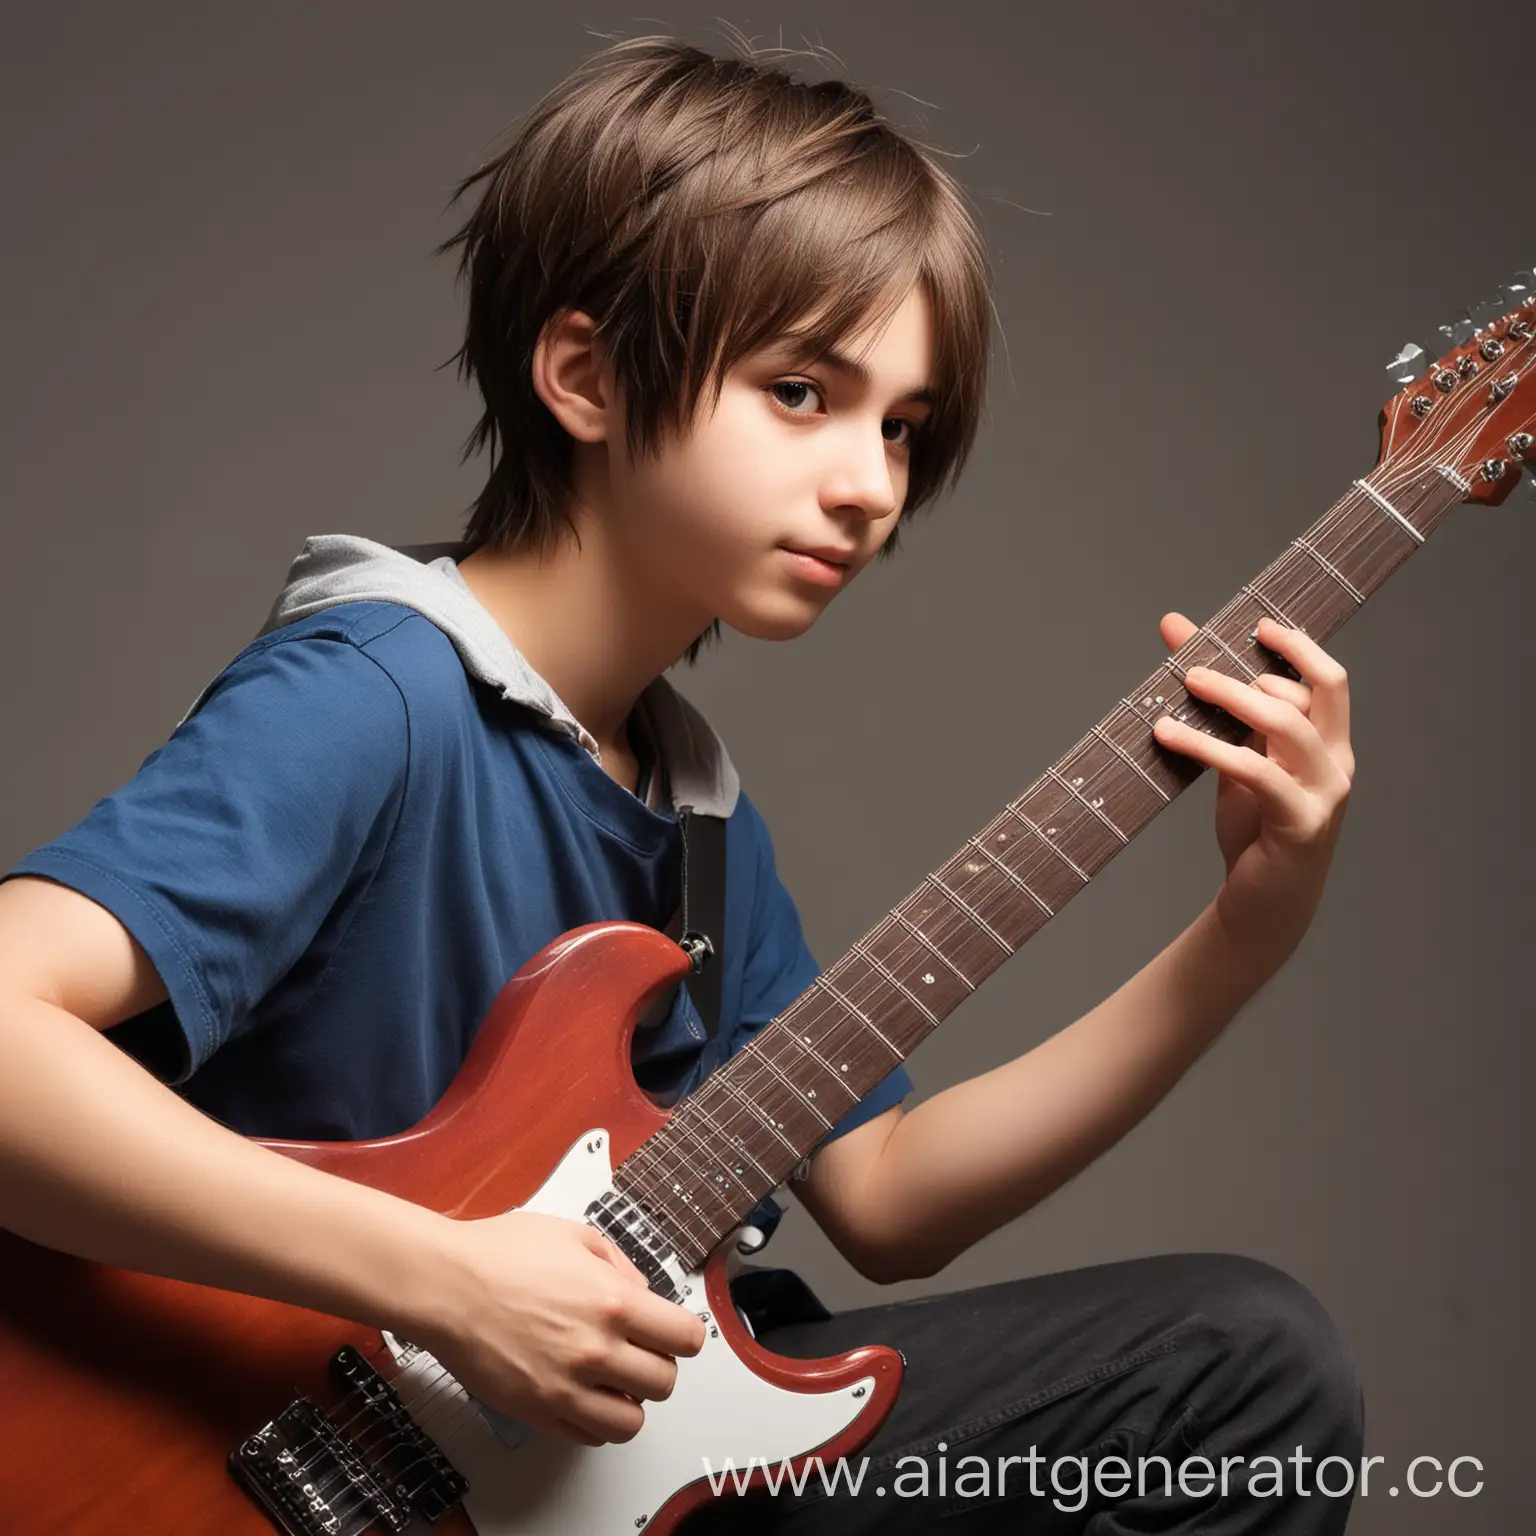 Anime-Teenager-Playing-Guitar-with-Passion